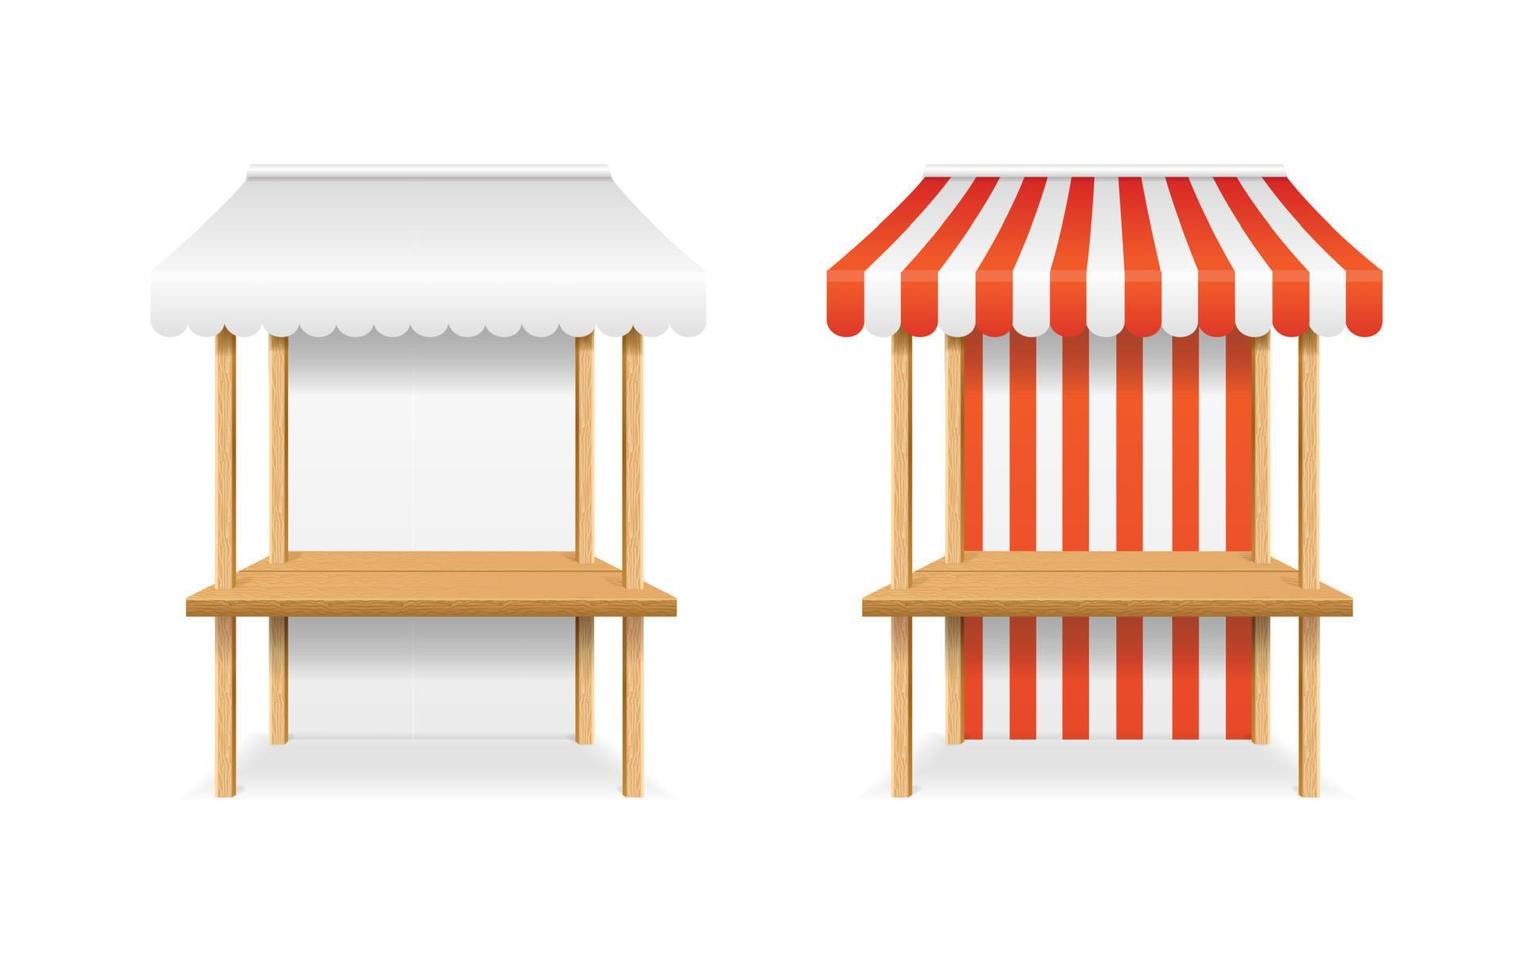 Realistic Detailed 3d Blank and Striped Market Stall Template Mockup Set. Vector